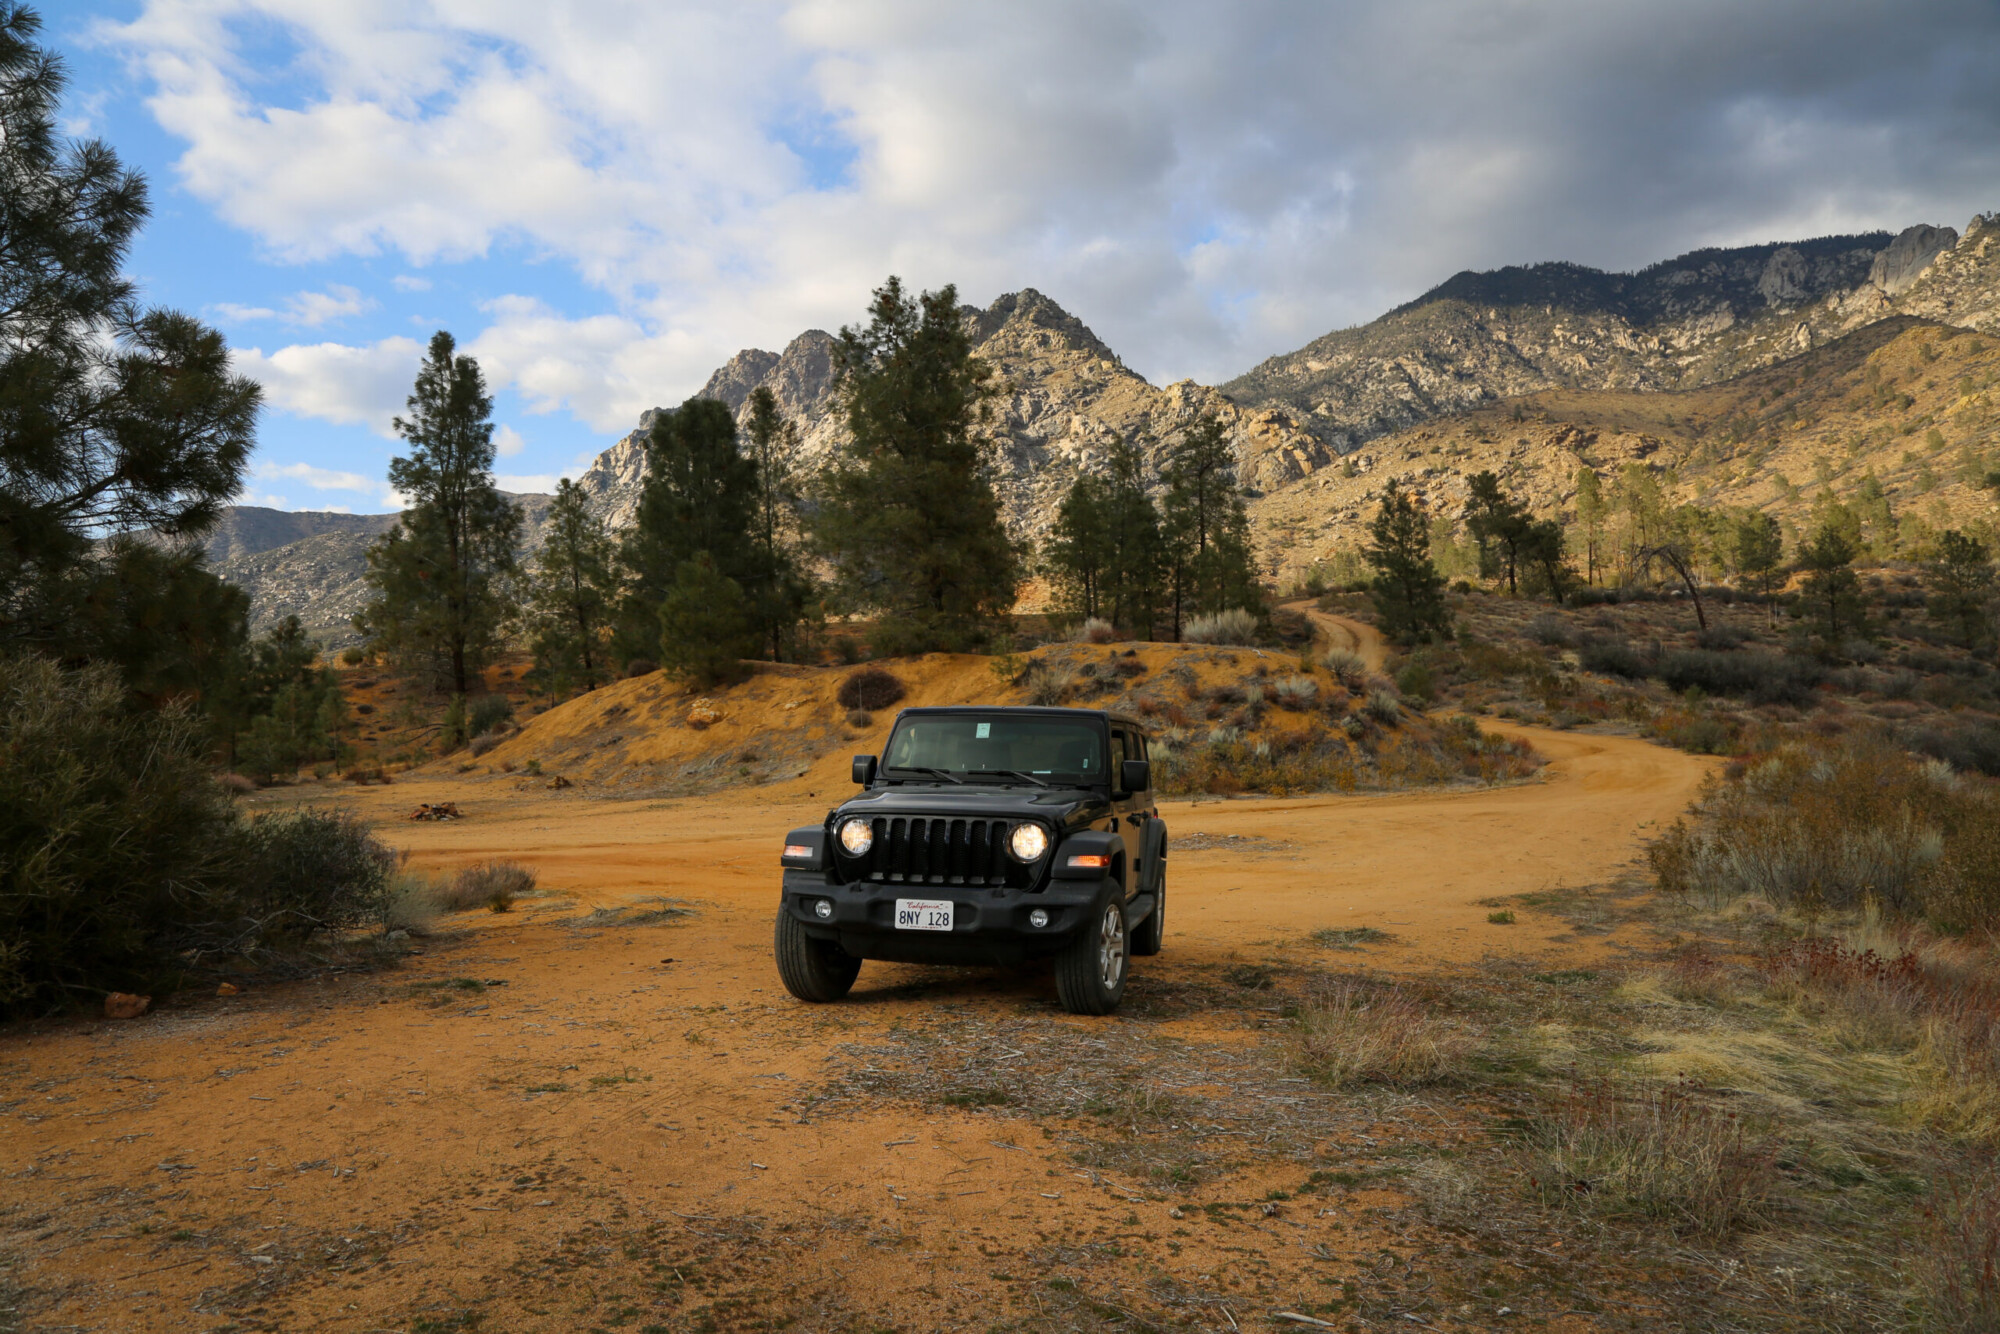 Photo of a black Jeep off-roading in a hilly and sparse conifer landscape near Kernville, California.